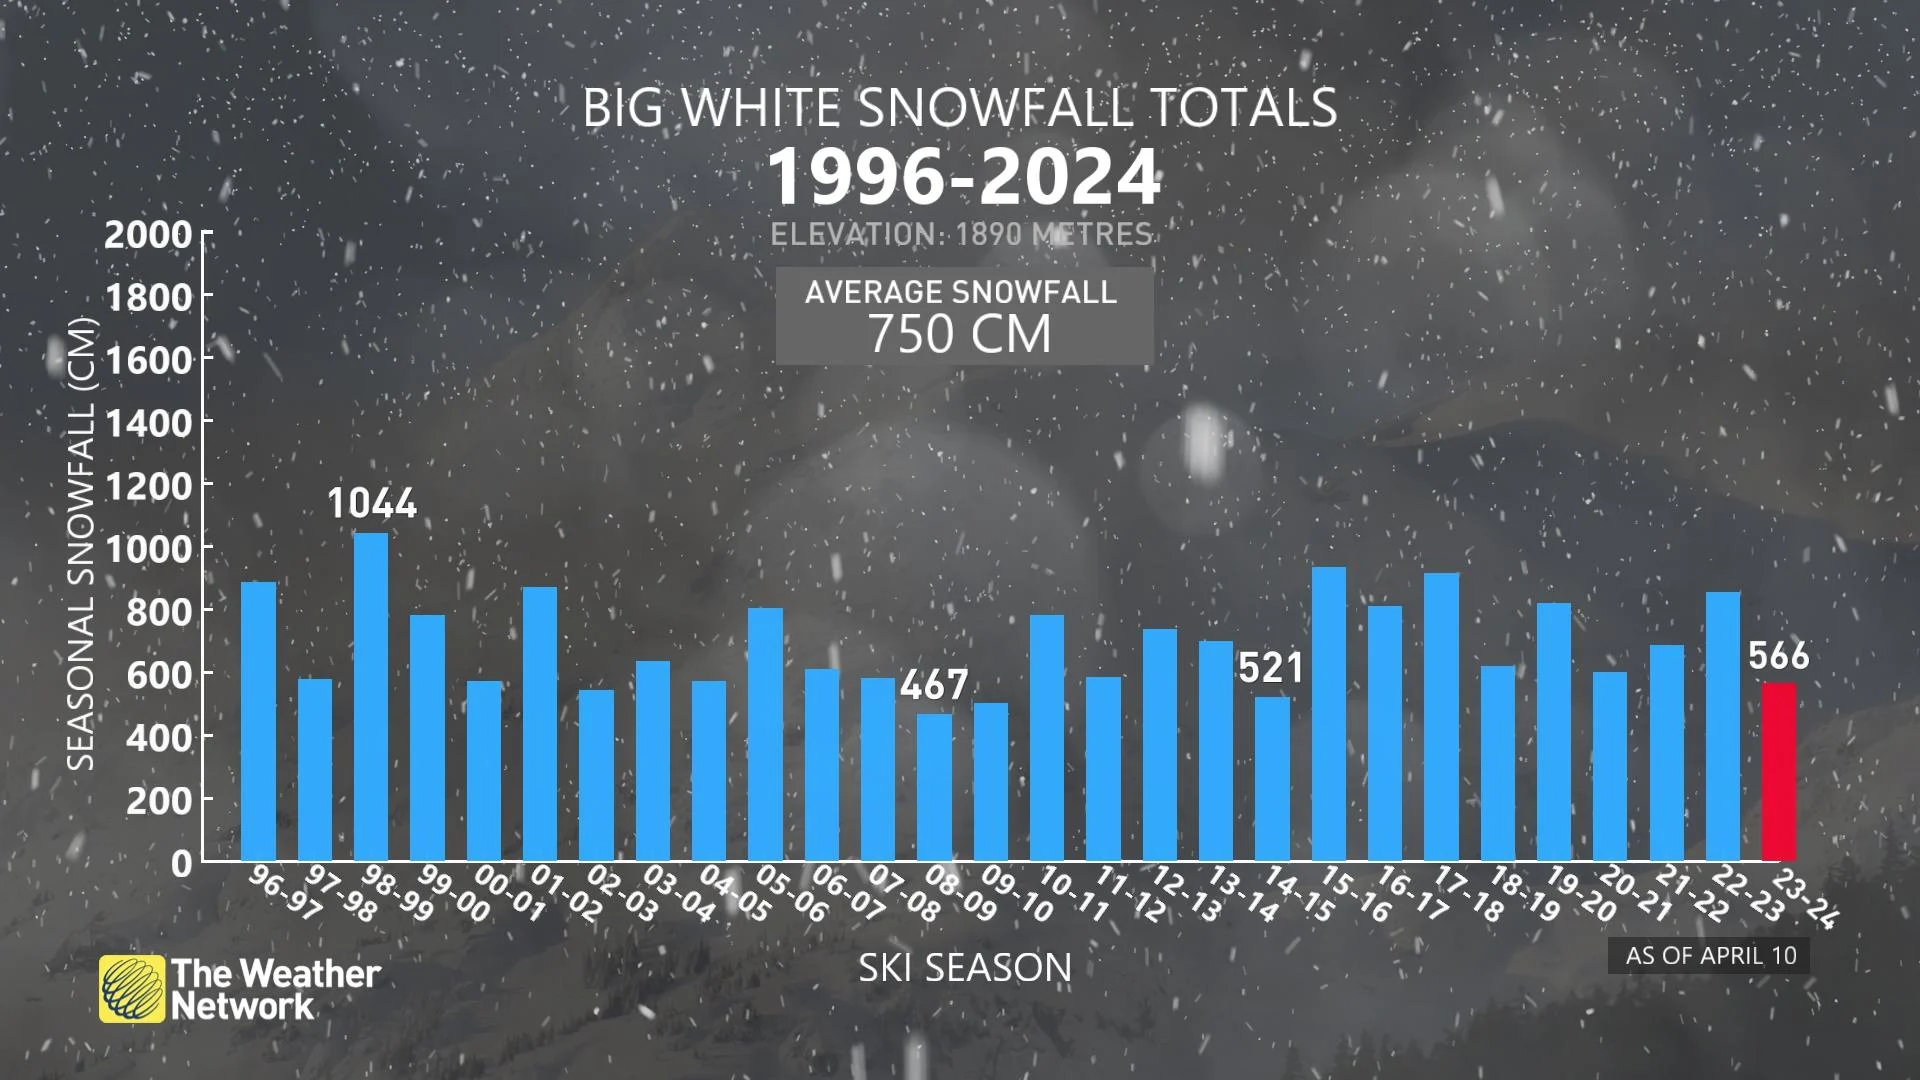 Big White average snowfall totals from 1996-2024